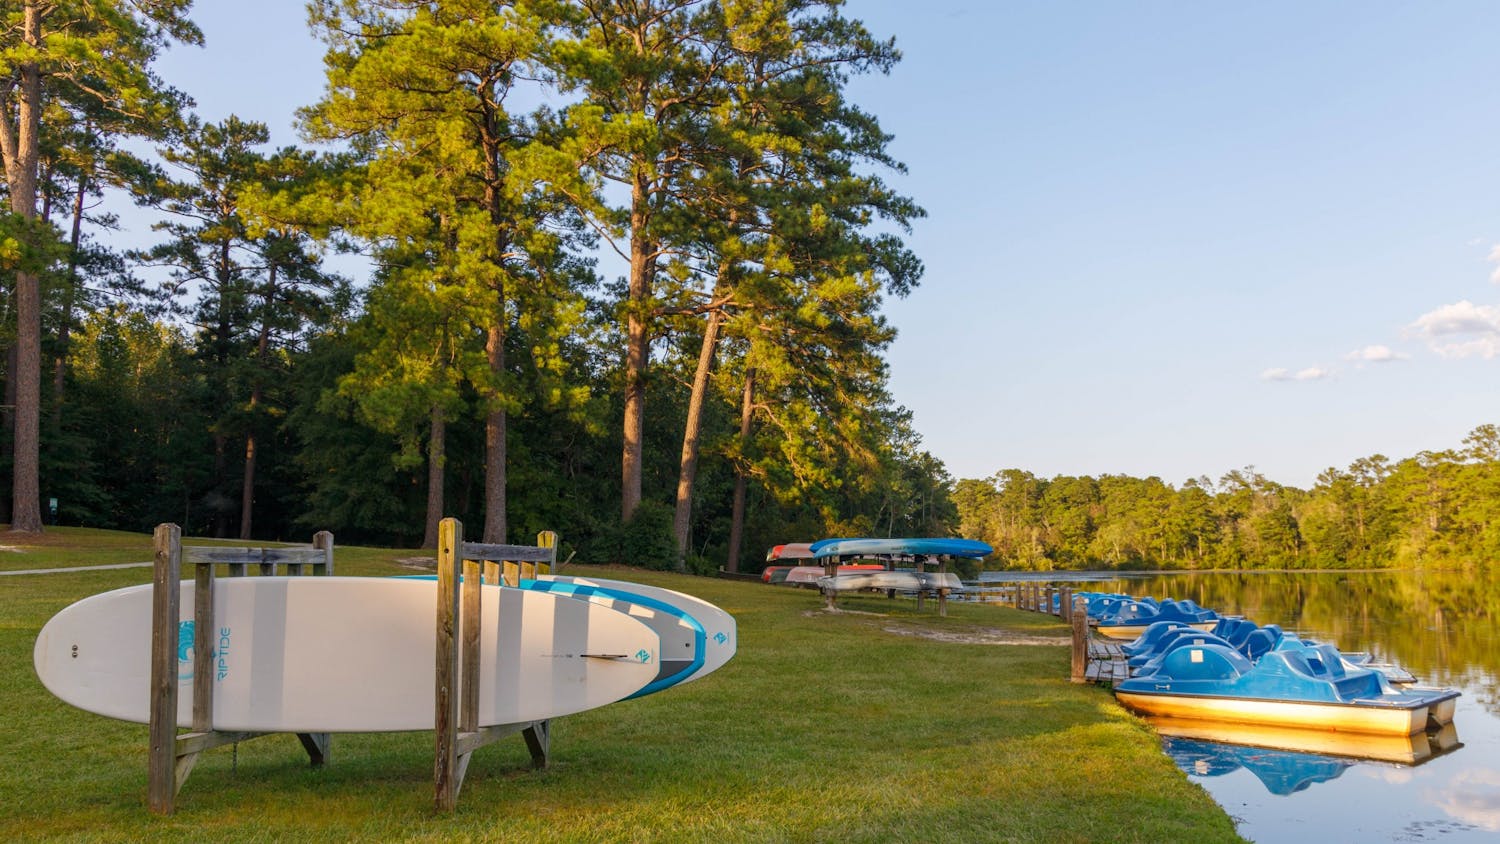 Paddle boats, canoes and water boards can be found on the side of the pond at Sesquicentennial State Park. The park also offers many spaces to hike, camp or relax.&nbsp;